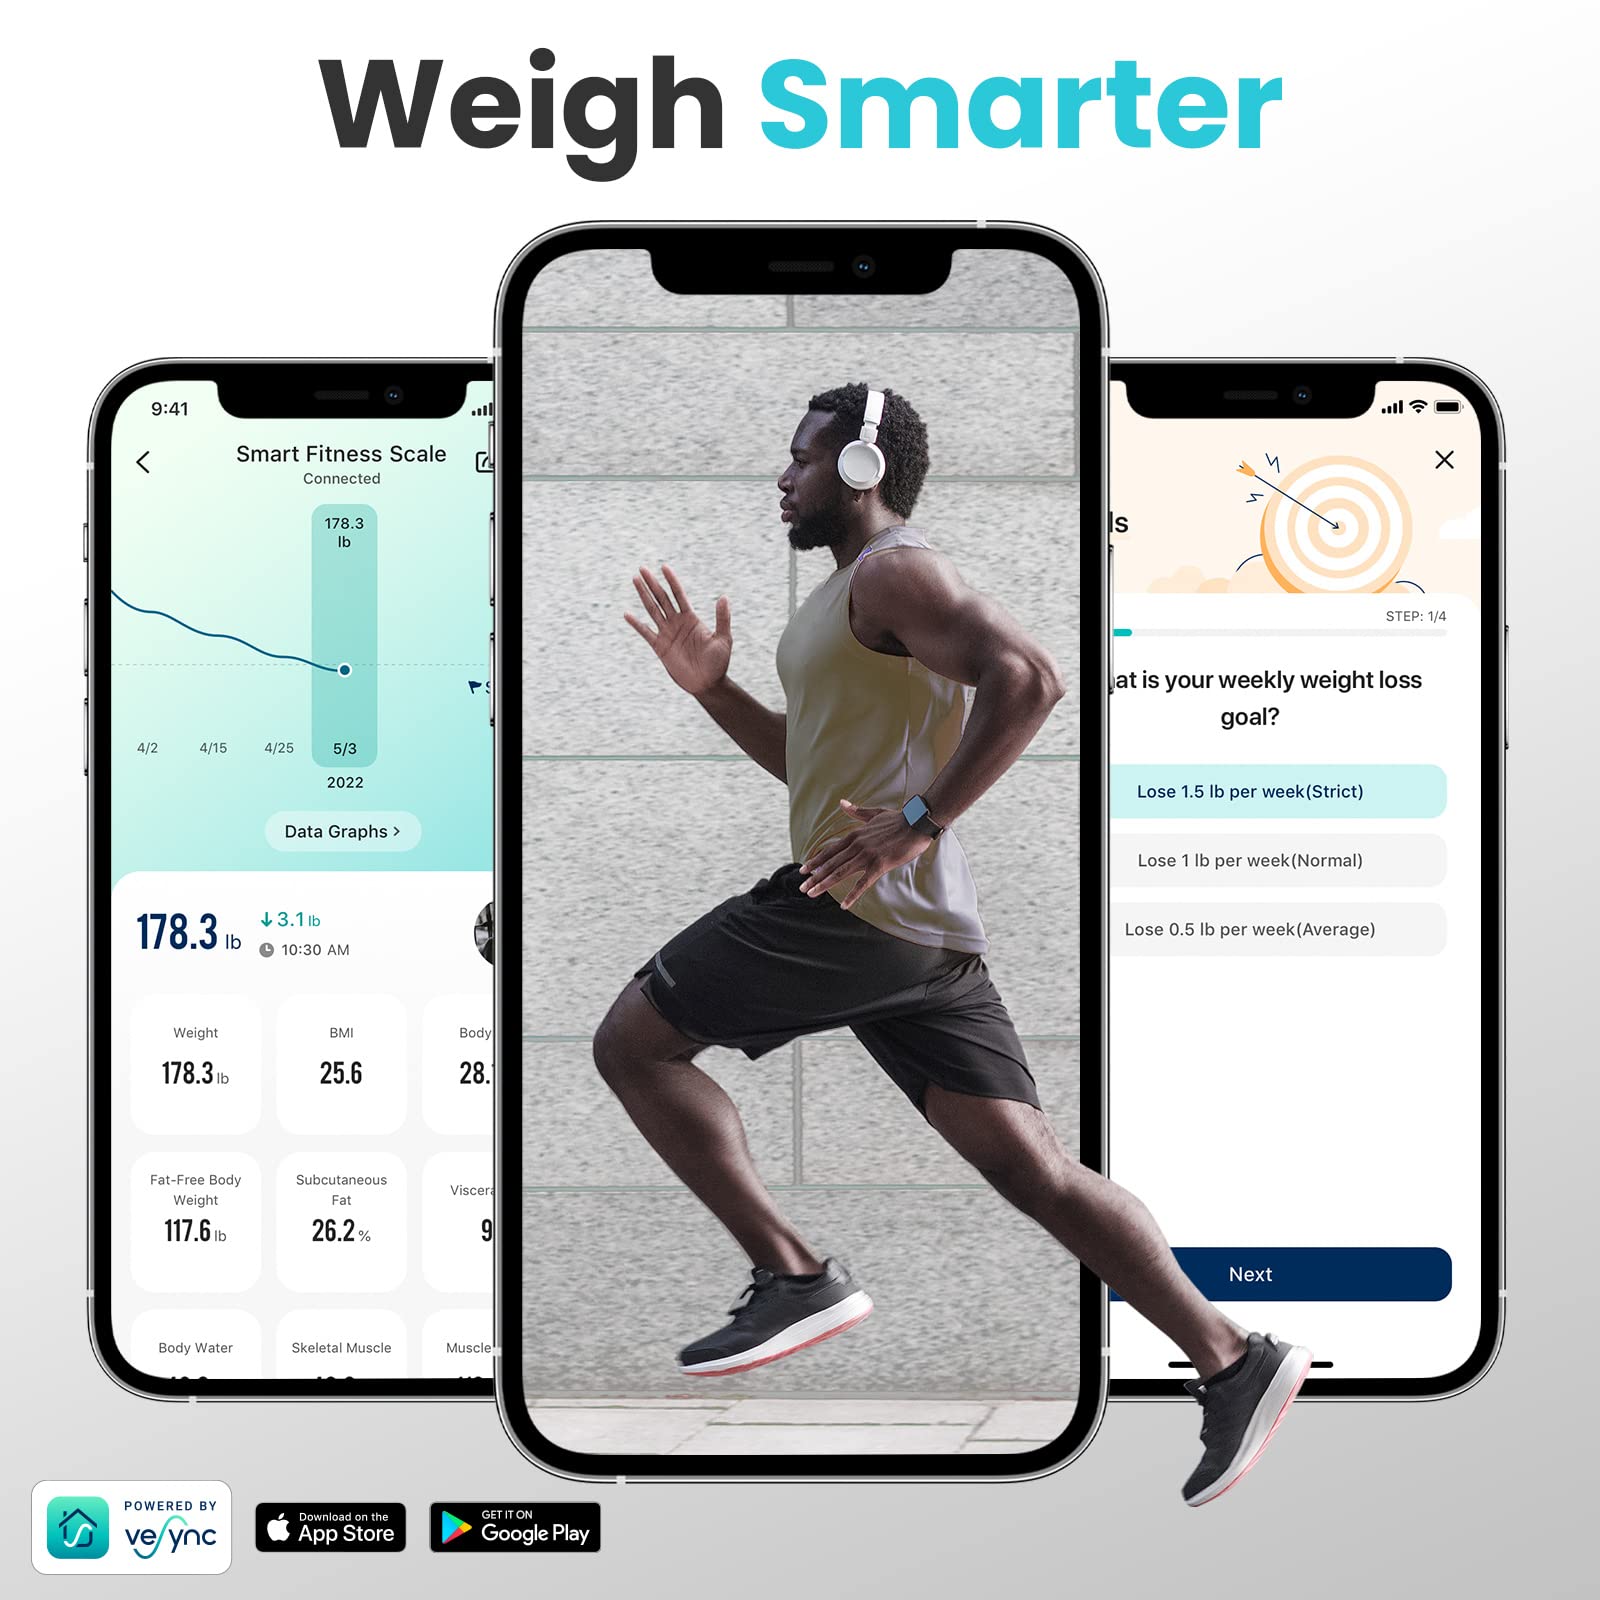 Etekcity Smart WiFi Scale for Body Weight, FSA HSA Store Approved, Compatible with Apple Health, Accurate Body Fat Muscle Mass Biometric Analysis, Digital Bathroom Measurement Device for Fitness